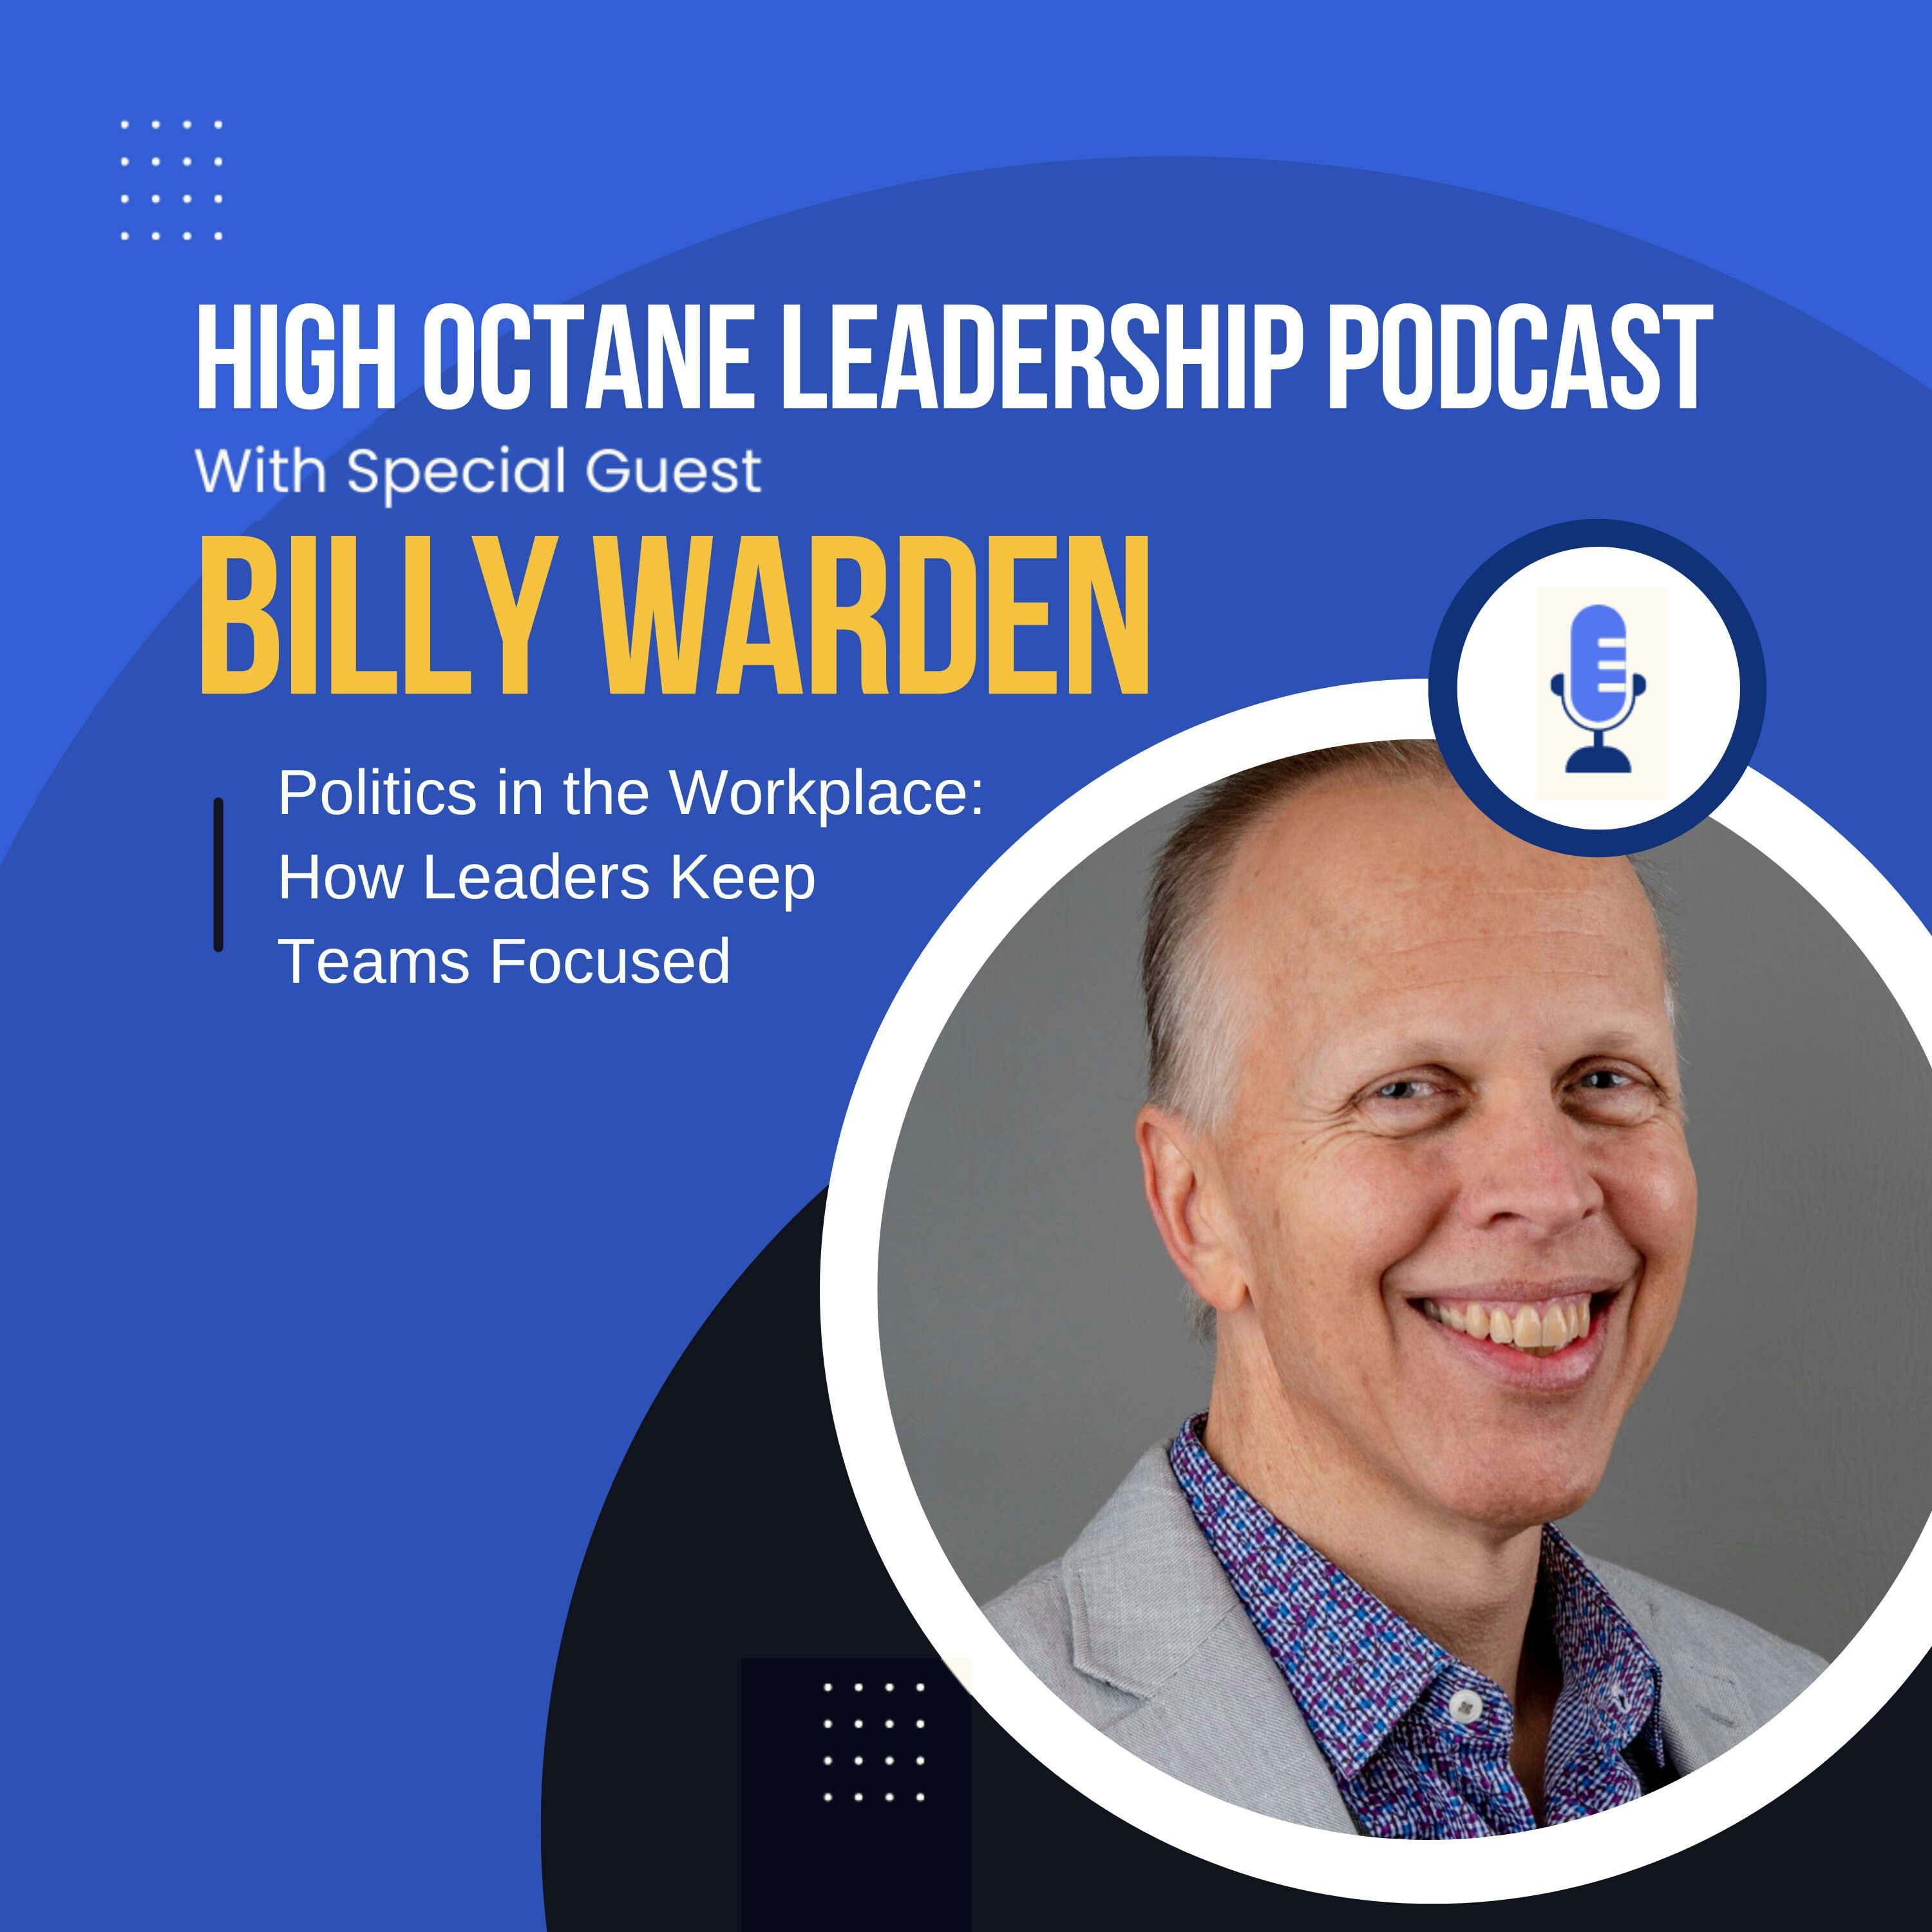 Politics in the Workplace: How Leaders Keep Teams Focused, with Billy Warden